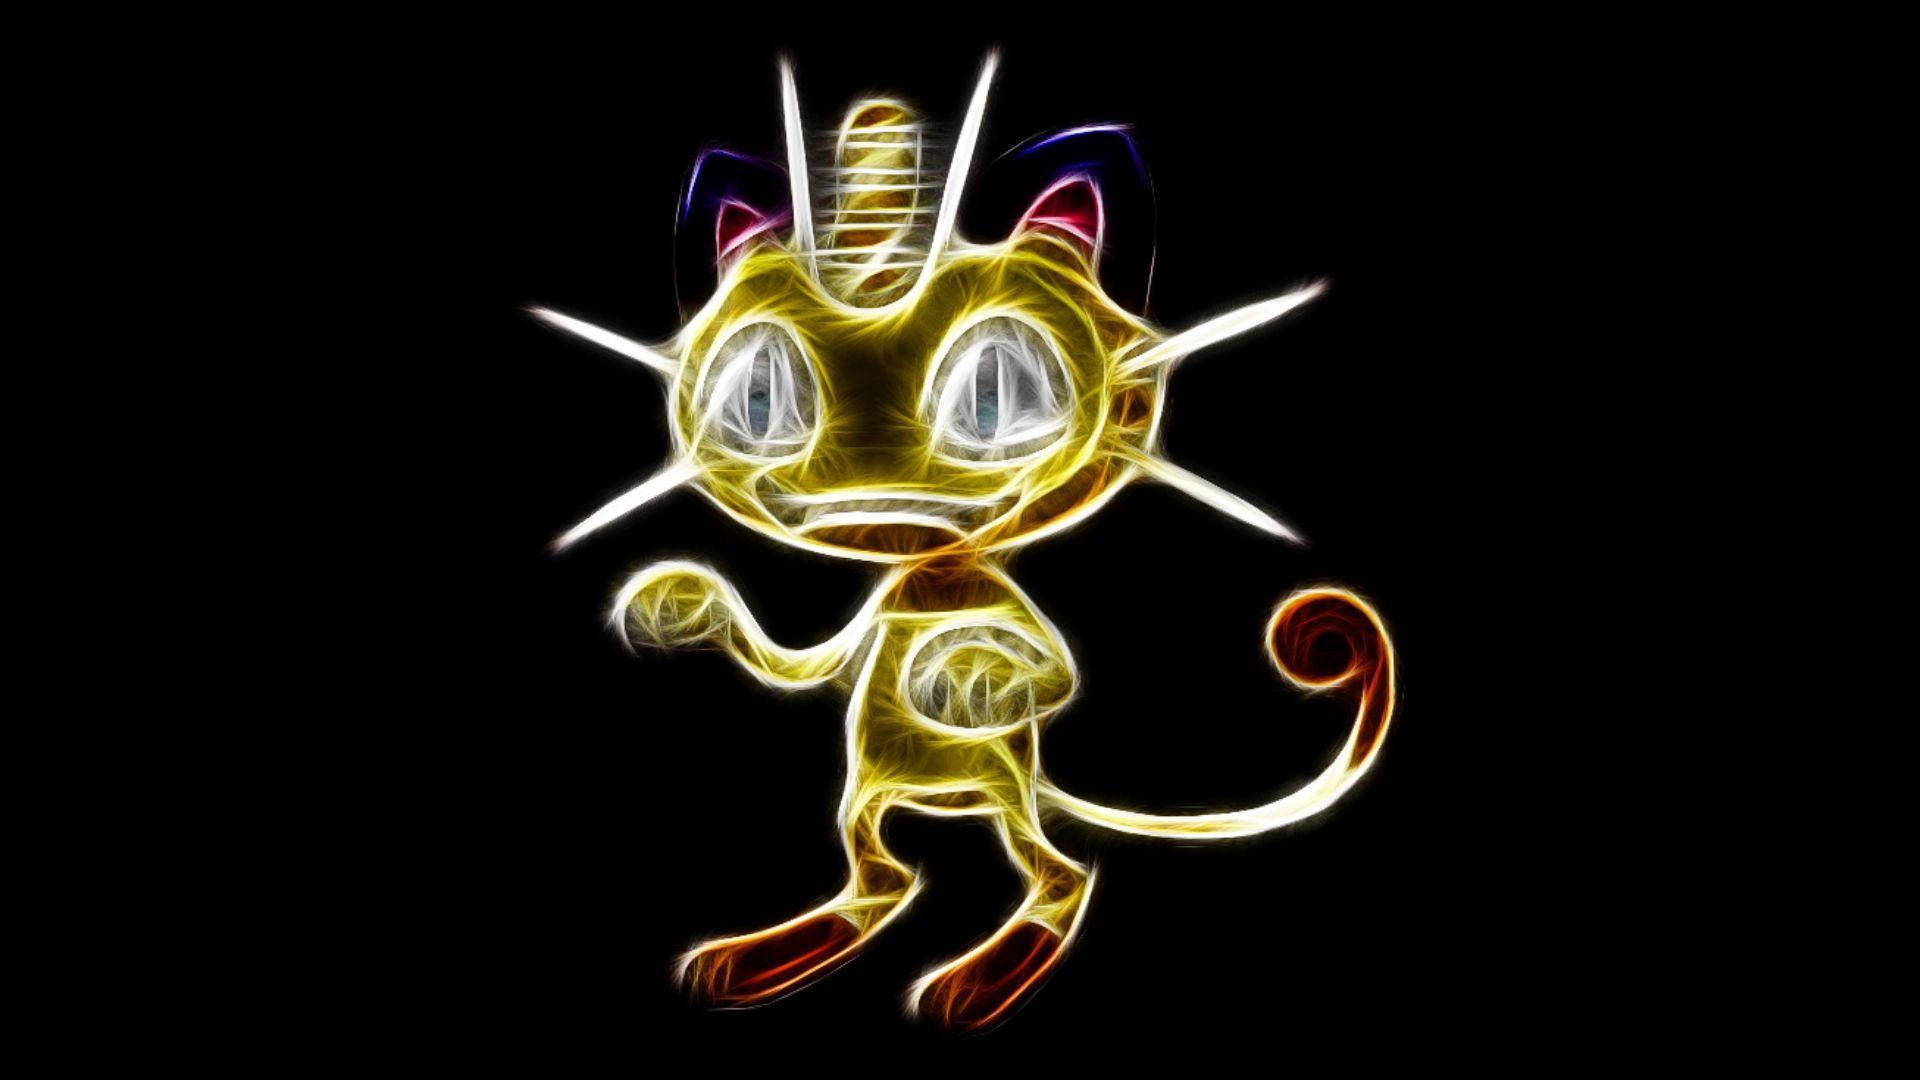 Meowth Drawn With Lights Wallpaper